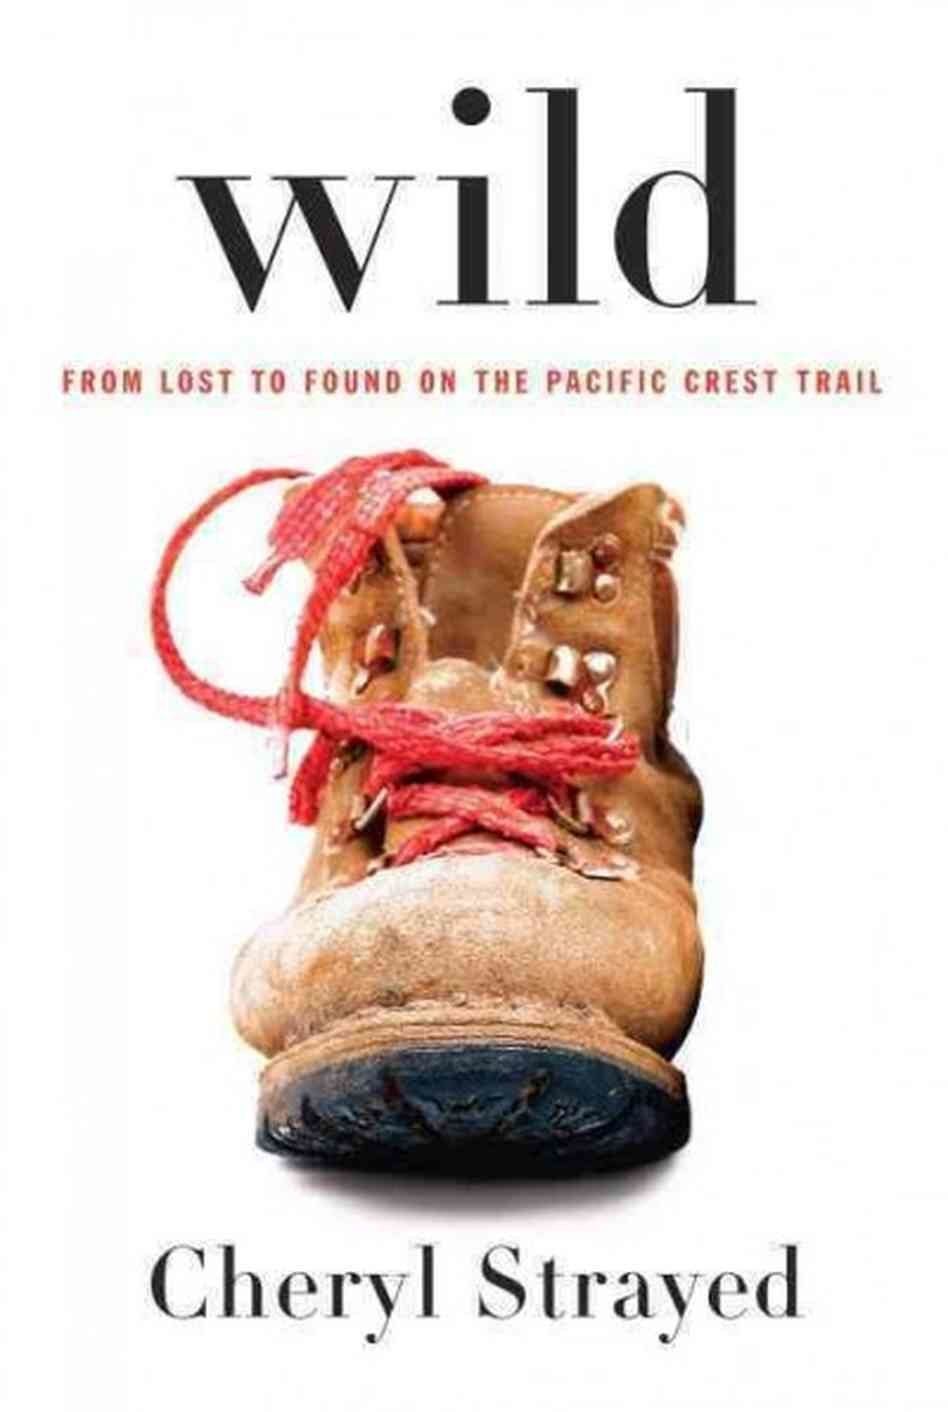 'Wild: From Lost To Found On The Pacific Crest Trail' by Cheryl Strayed